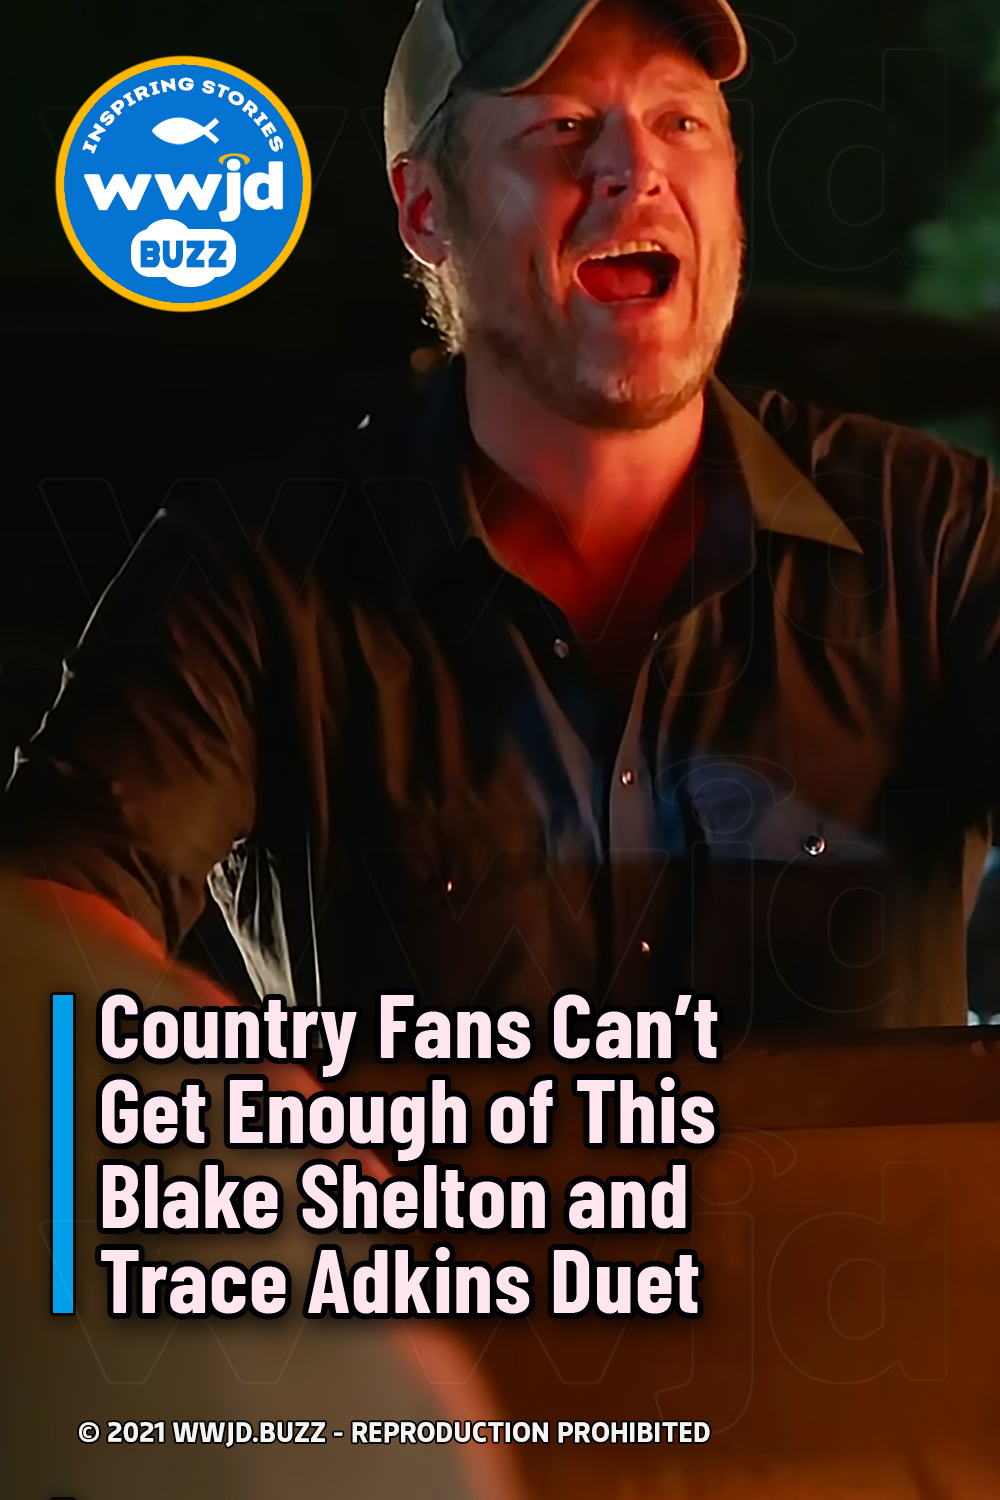 Country Fans Can’t Get Enough of This Blake Shelton and Trace Adkins Duet